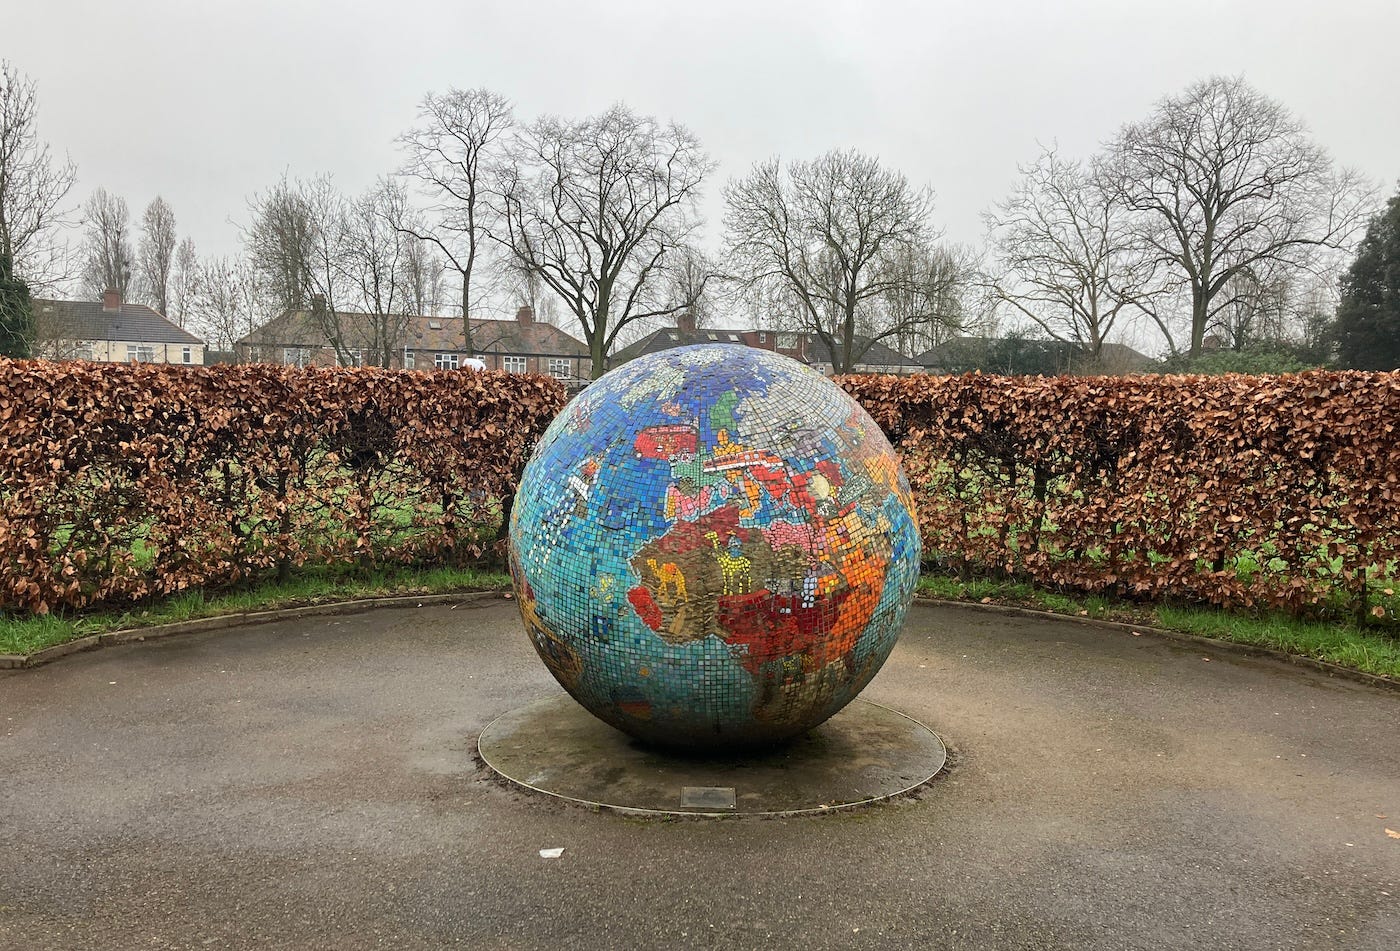 A large concrete ball with a colourful mosaic of the world map